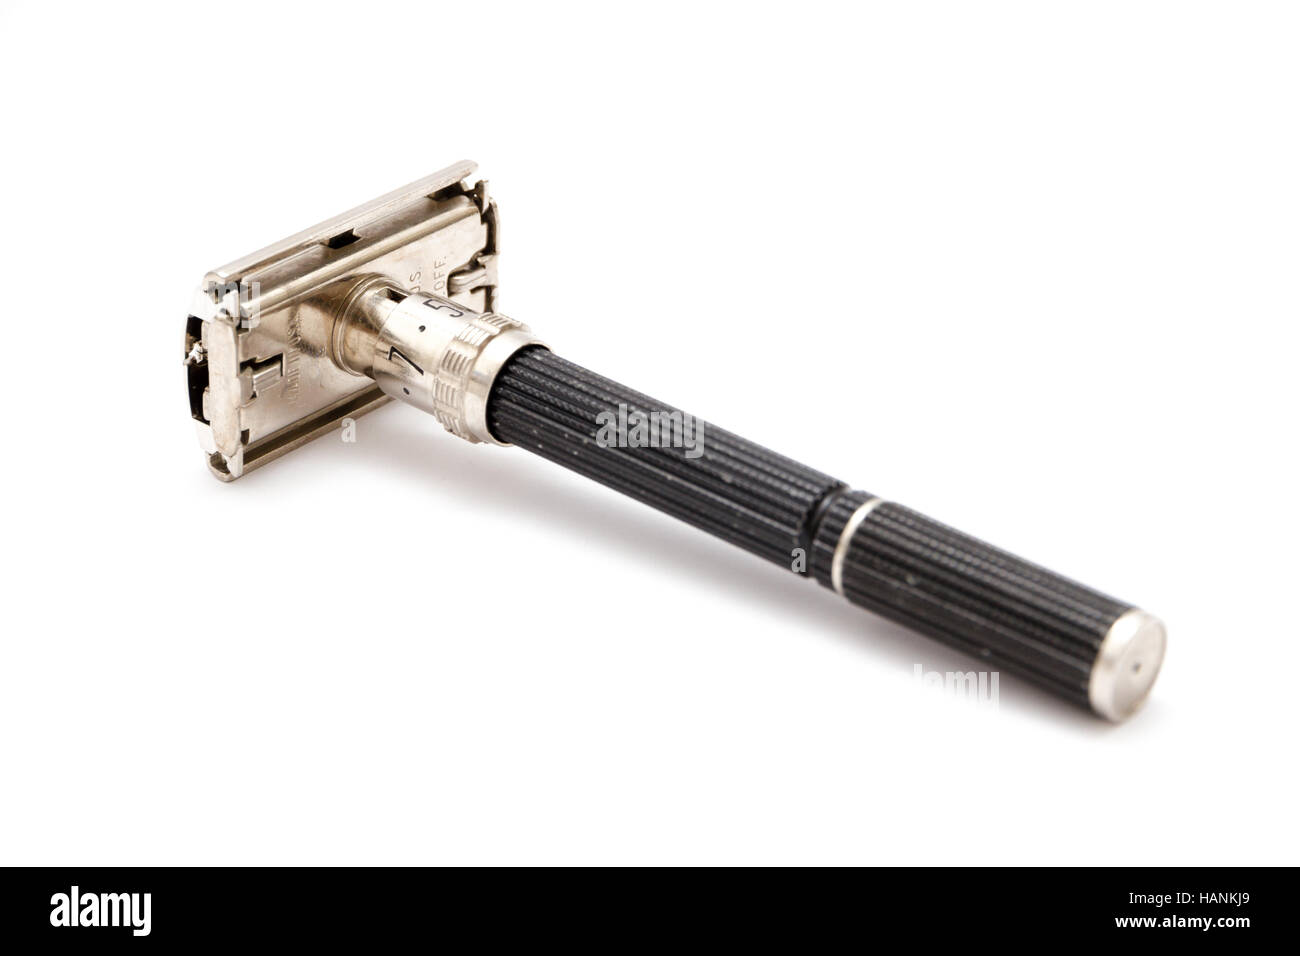 Rome, Italy - August 10, 2015: Traditional double edge safety razor on display Stock Photo